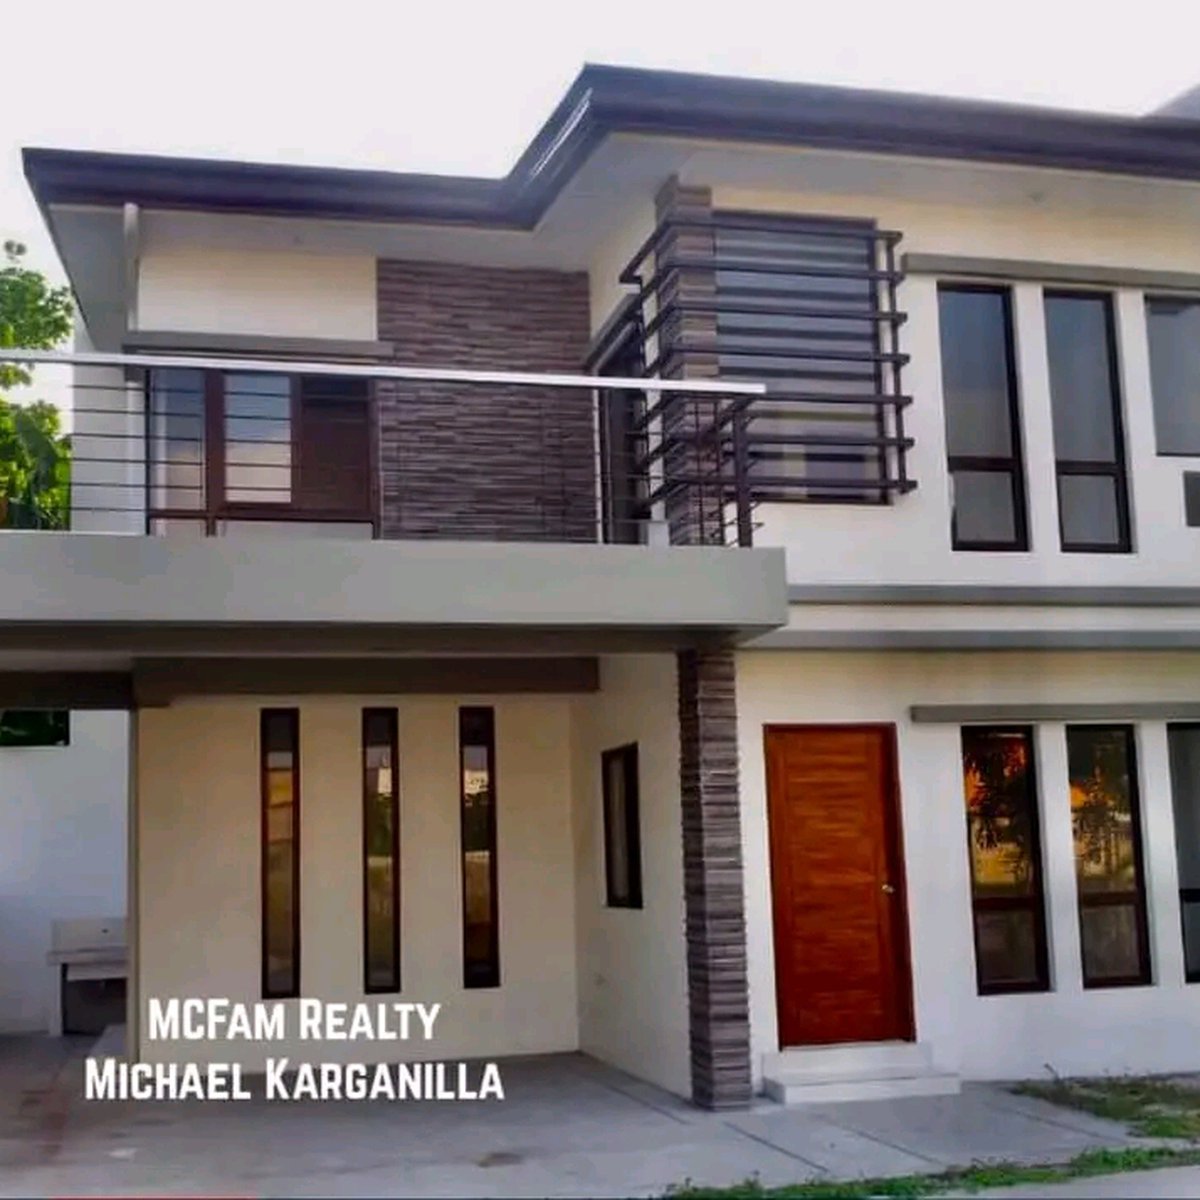 4-bedroom Single Attached House For Sale in Valenzuela Metro Manila